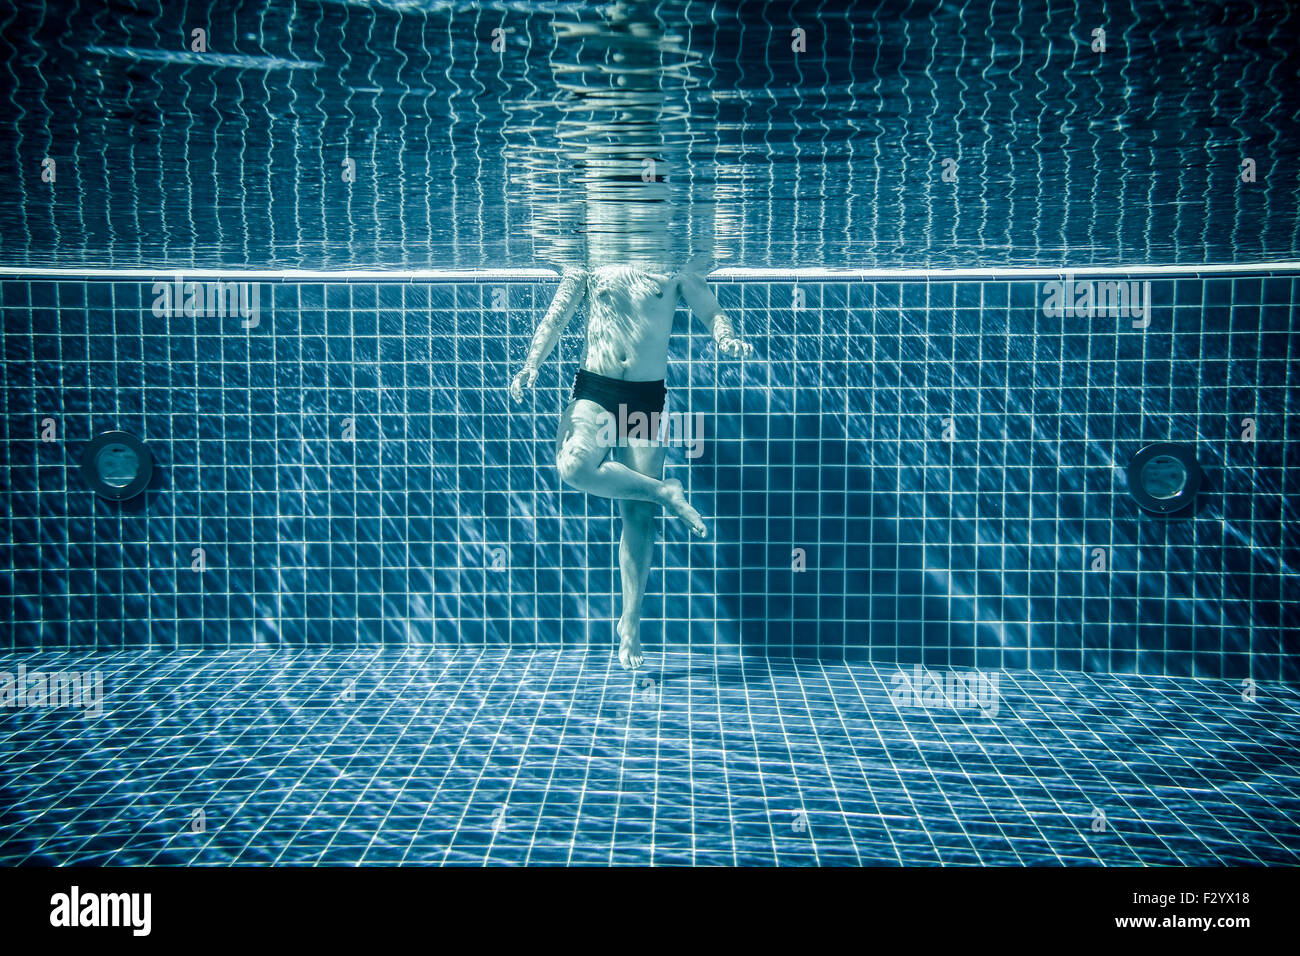 Man standing under water in a swimming pool Stock Photo